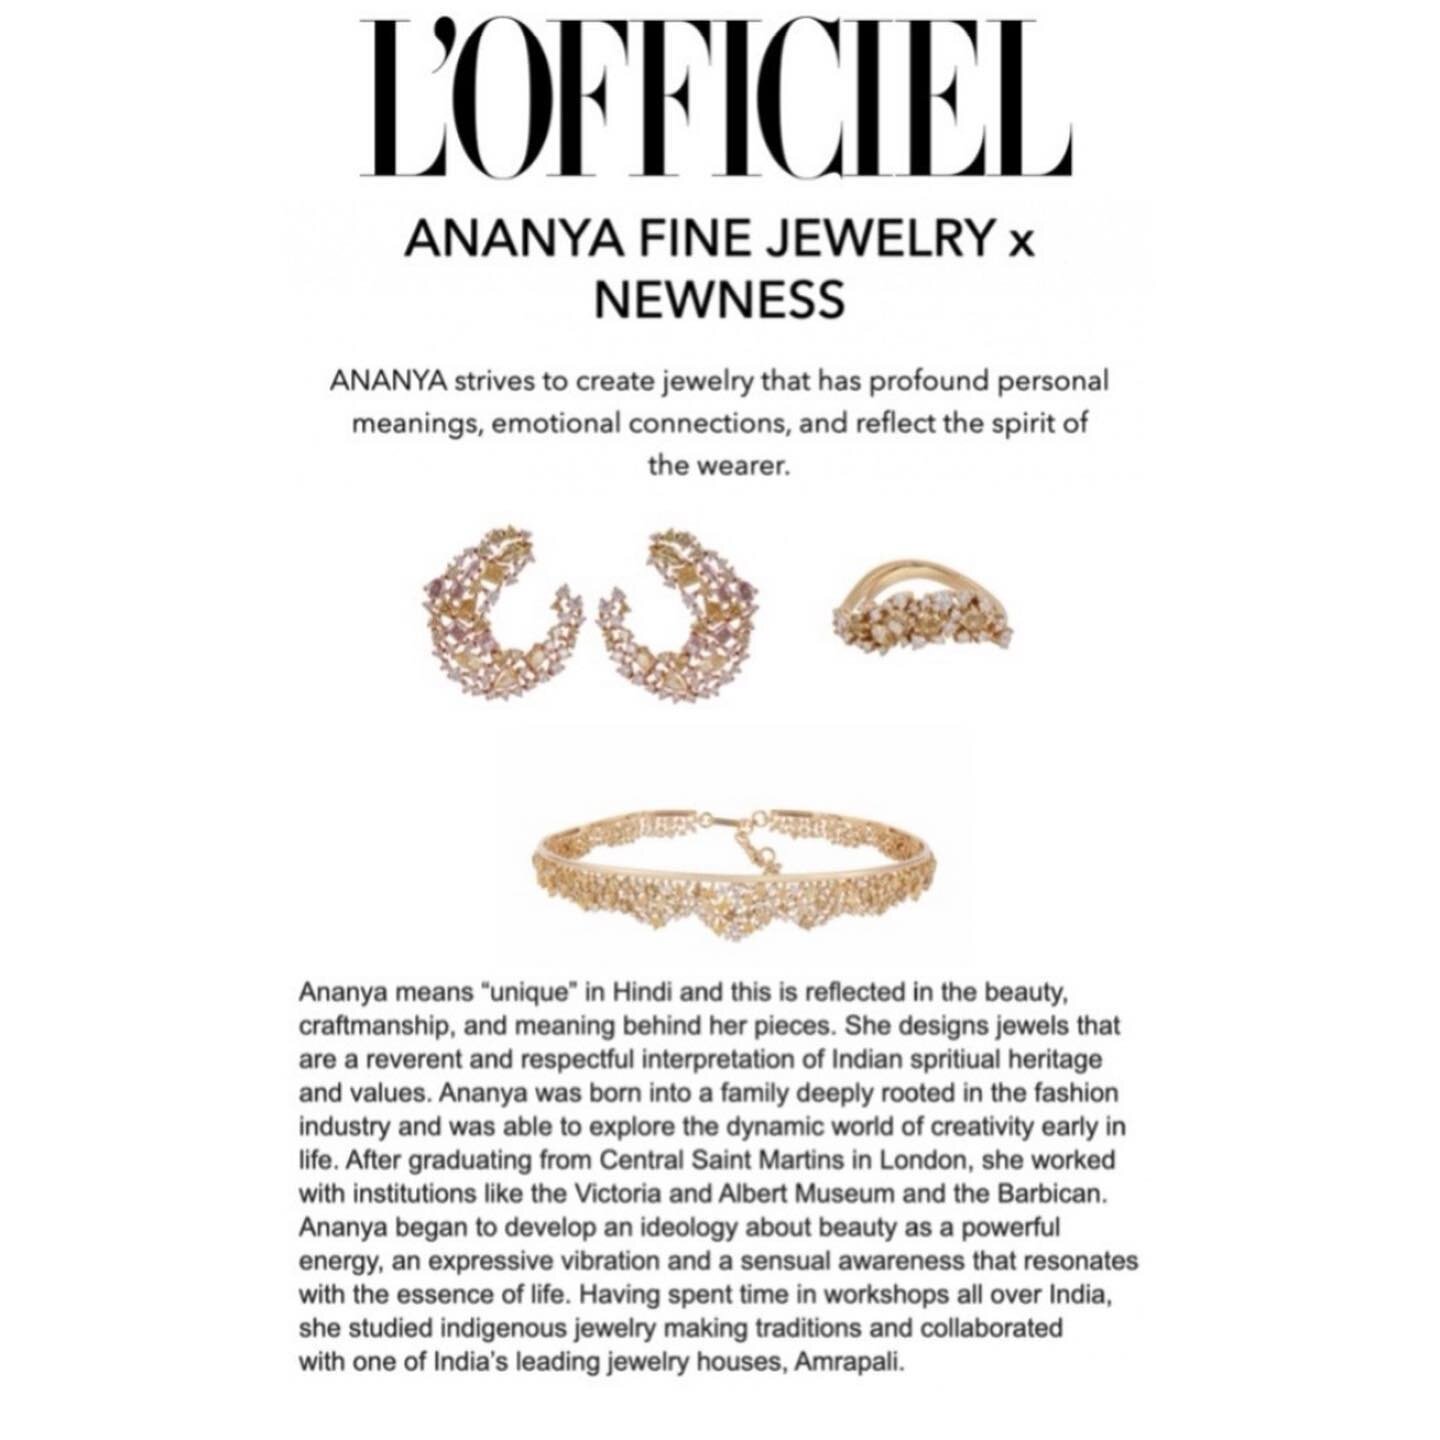 Thank you @lofficielarabia for the fantastic write up on the new @ananyafinejewellery high jewelry collection 💎